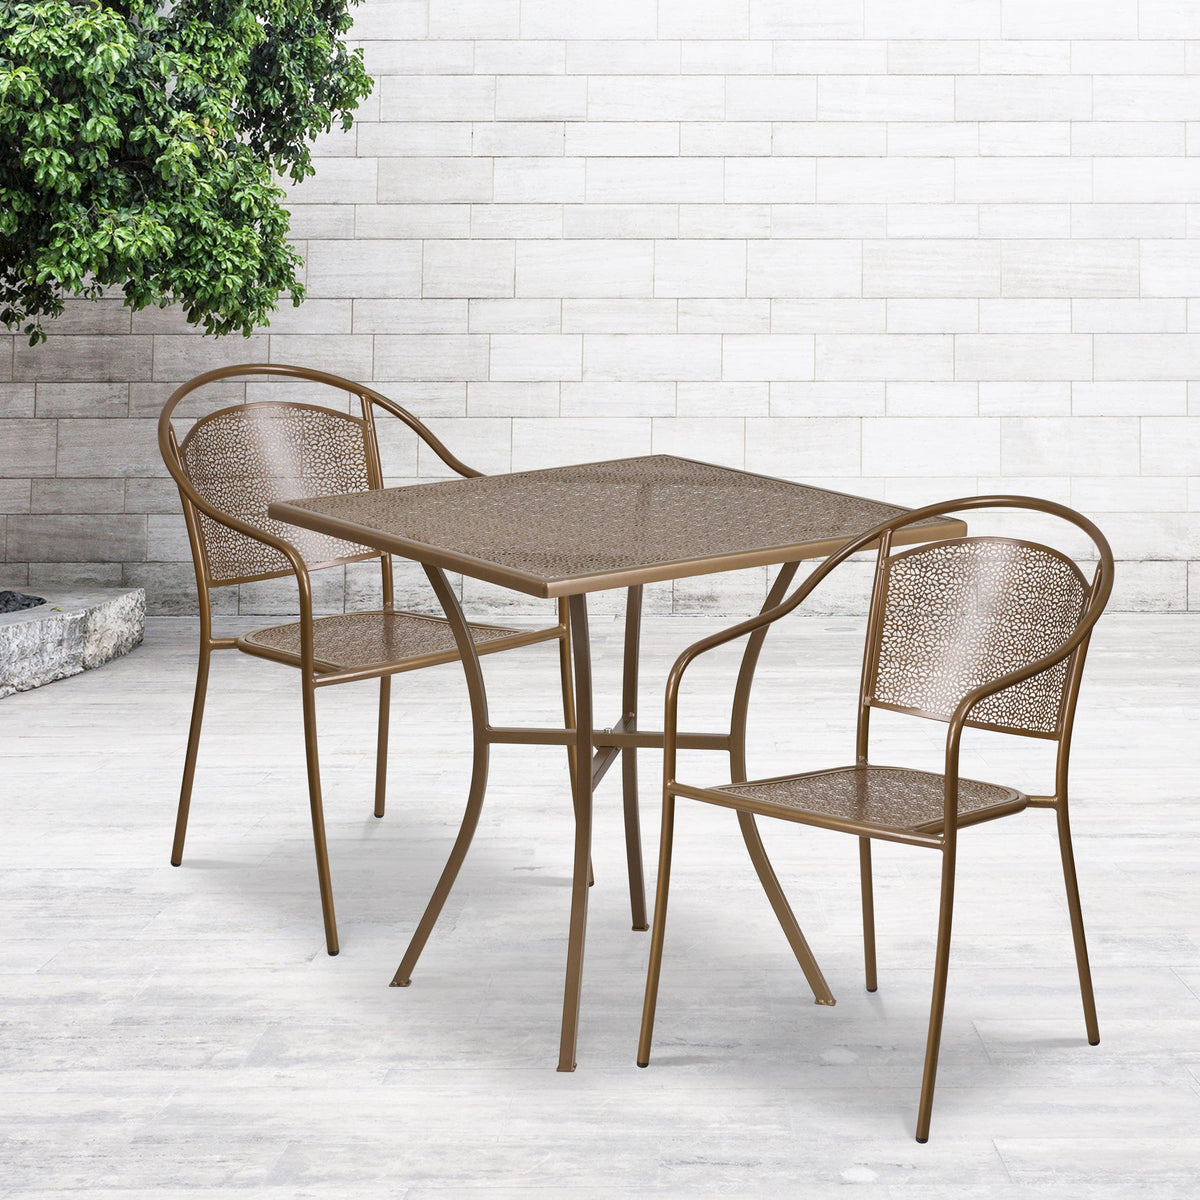 Gold |#| 28inch Square Gold Indoor-Outdoor Steel Patio Table Set with 2 Round Back Chairs